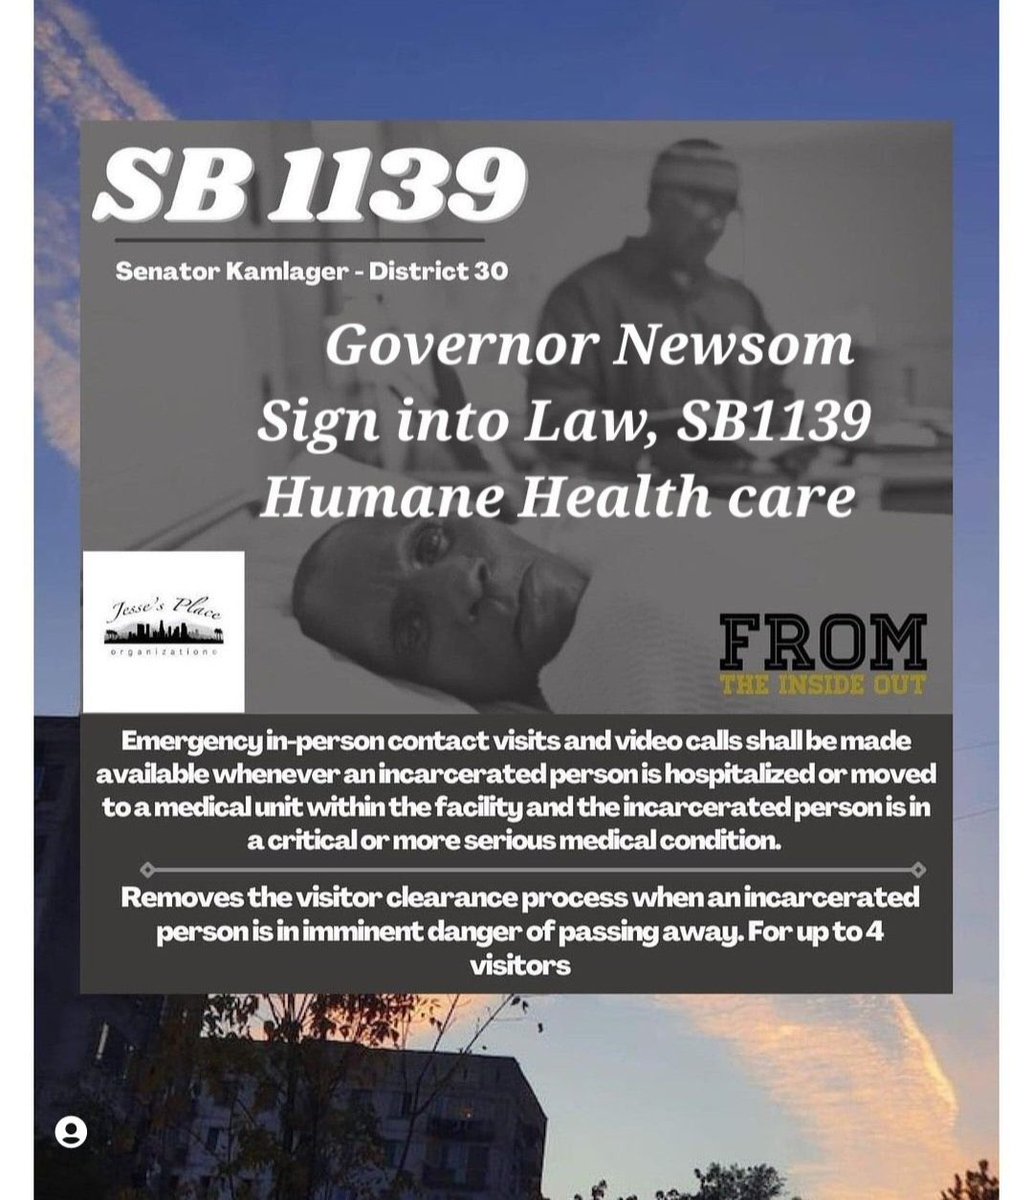 We need SB1139 Humane Healthcare bill signed to keep families informed of Medical Emergencies for CA prisoners 💙 @CAgovernor @GavinNewsom asking for #SB1139 signature 🏥✍🏻